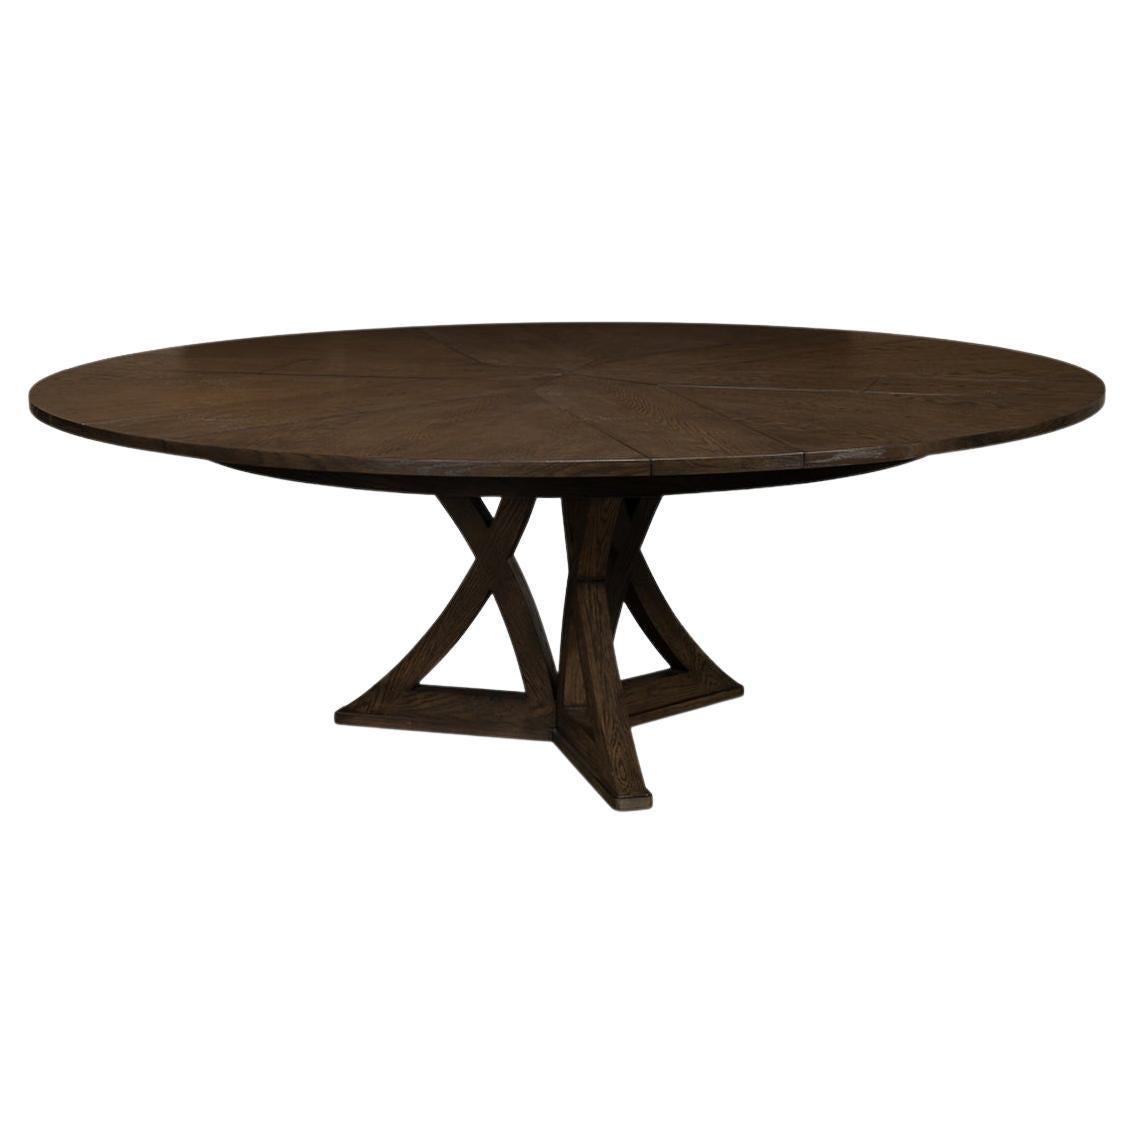 Rustic Round Dining Table, Artisan Grey For Sale